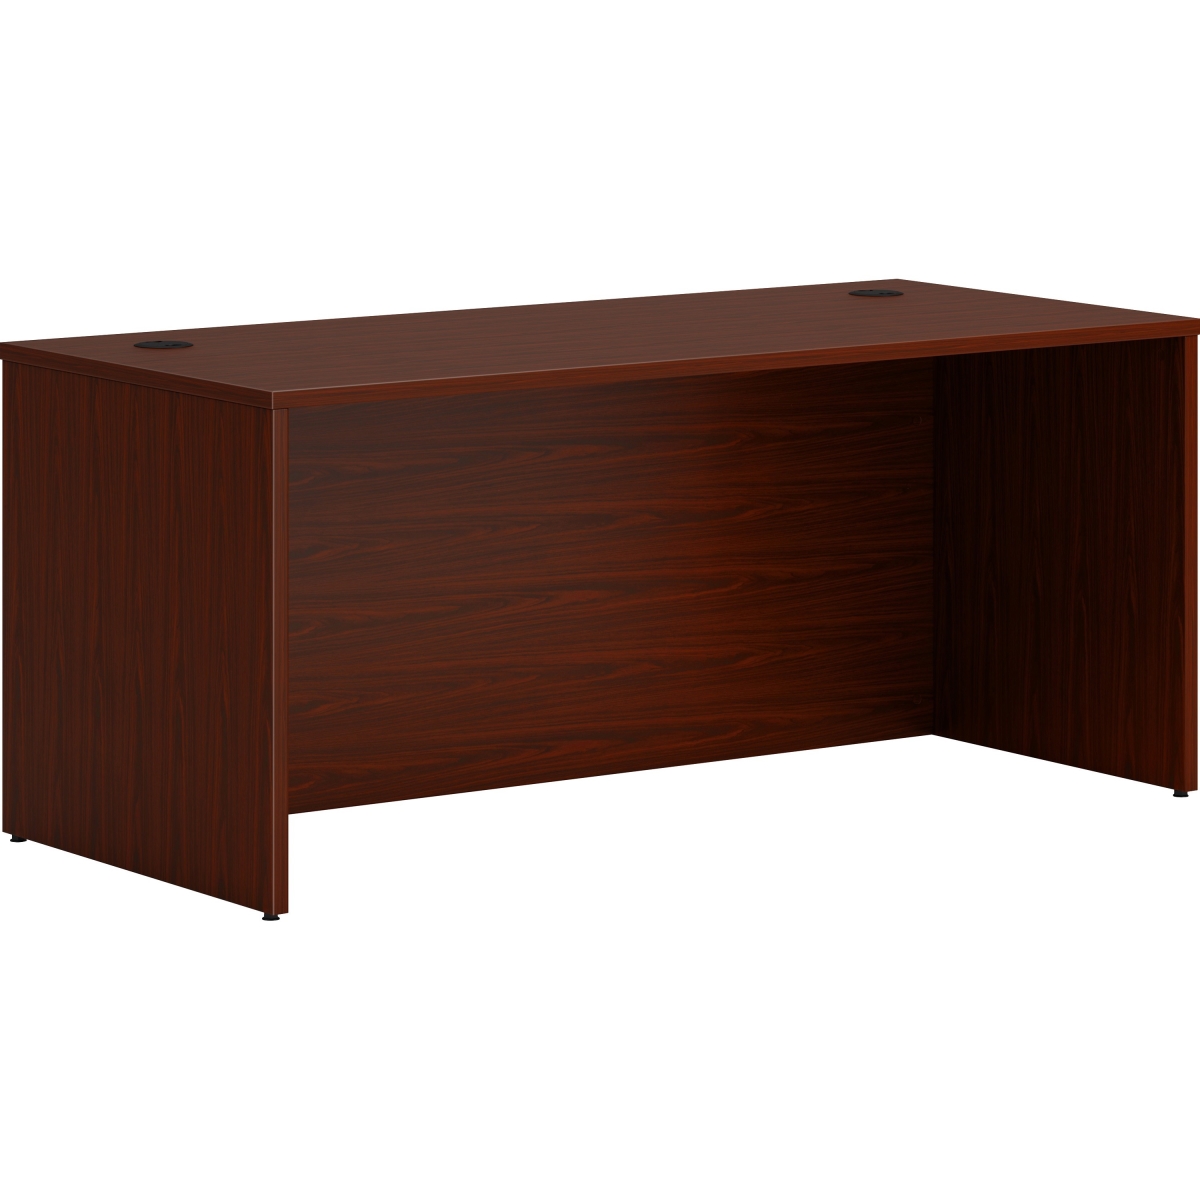 UPC 194966436635 product image for LDS6630LT1 66 in. Rectangle Shell Desk, Mahogany | upcitemdb.com